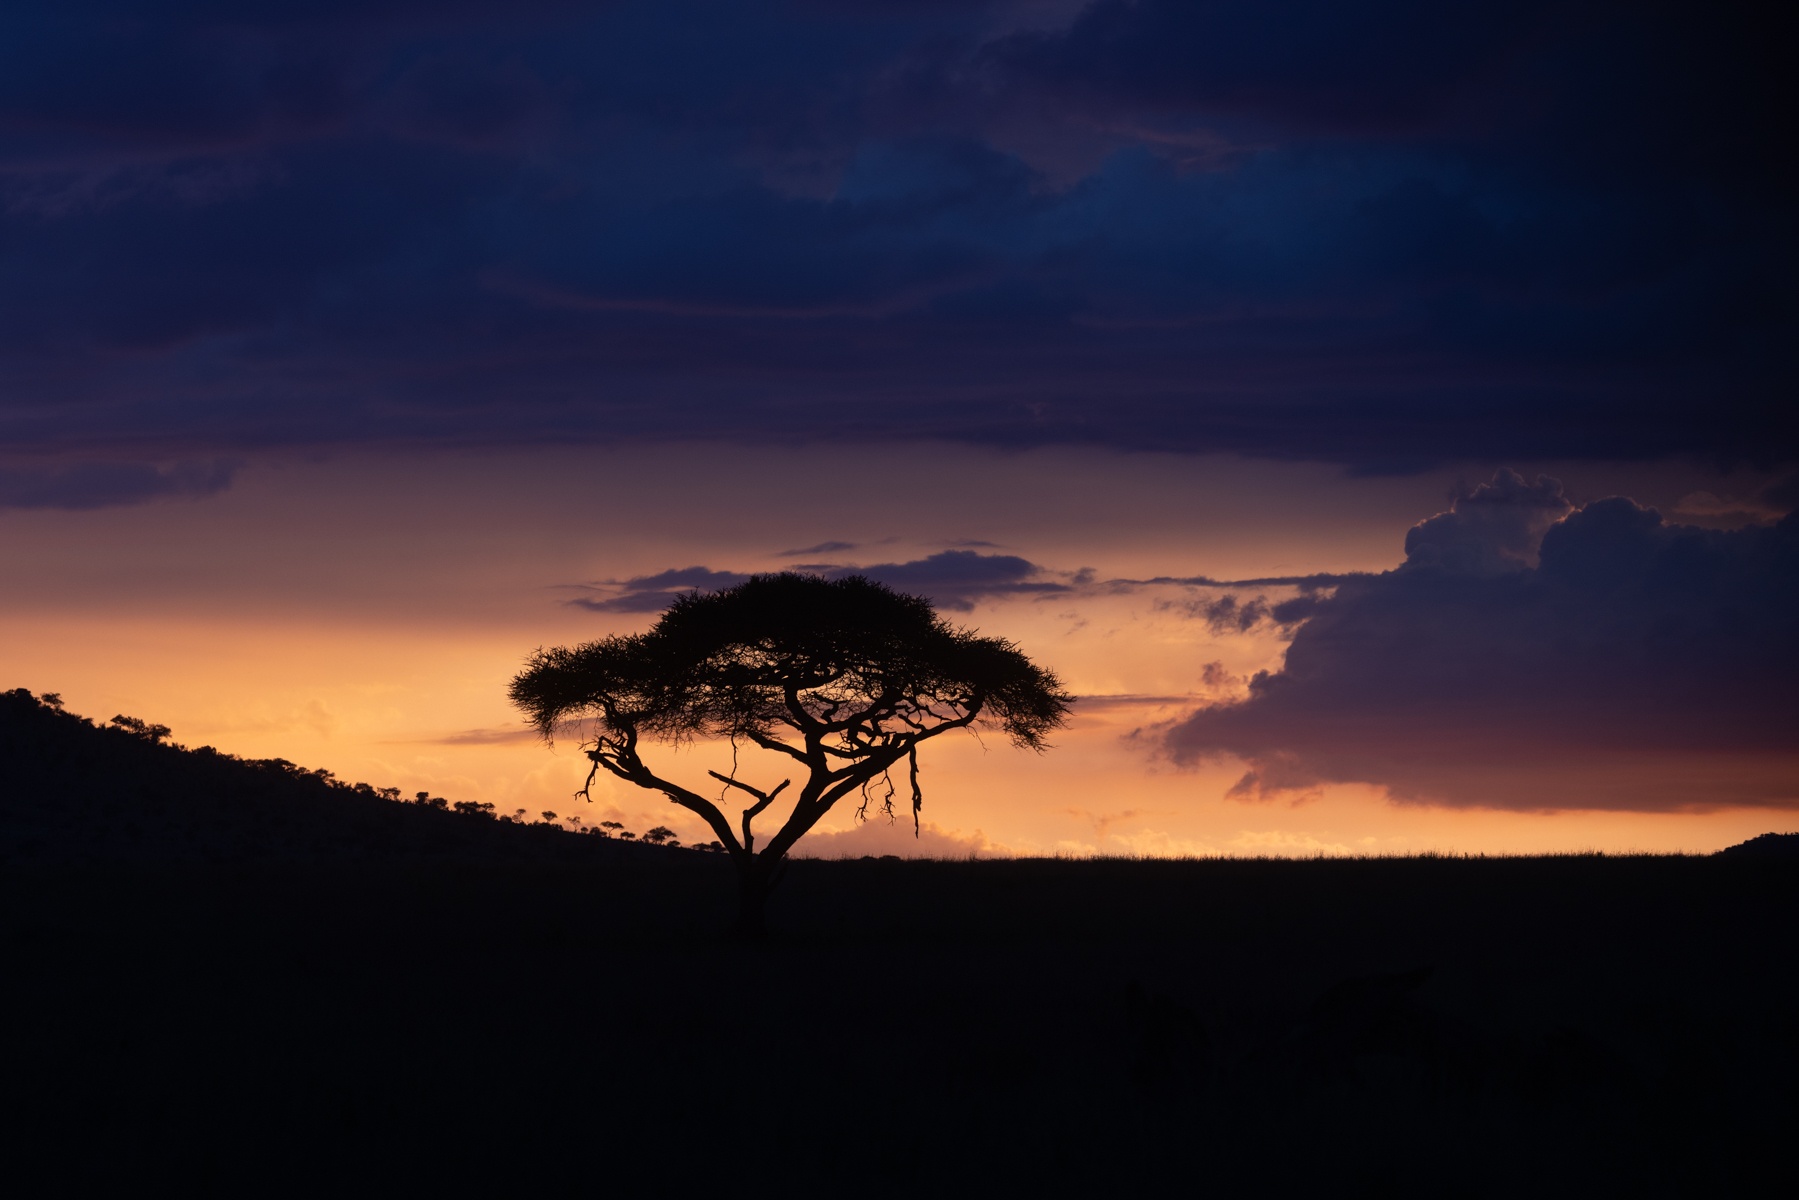 The wondrous beauty of the skies over the Serengeti at the start of the monsoon